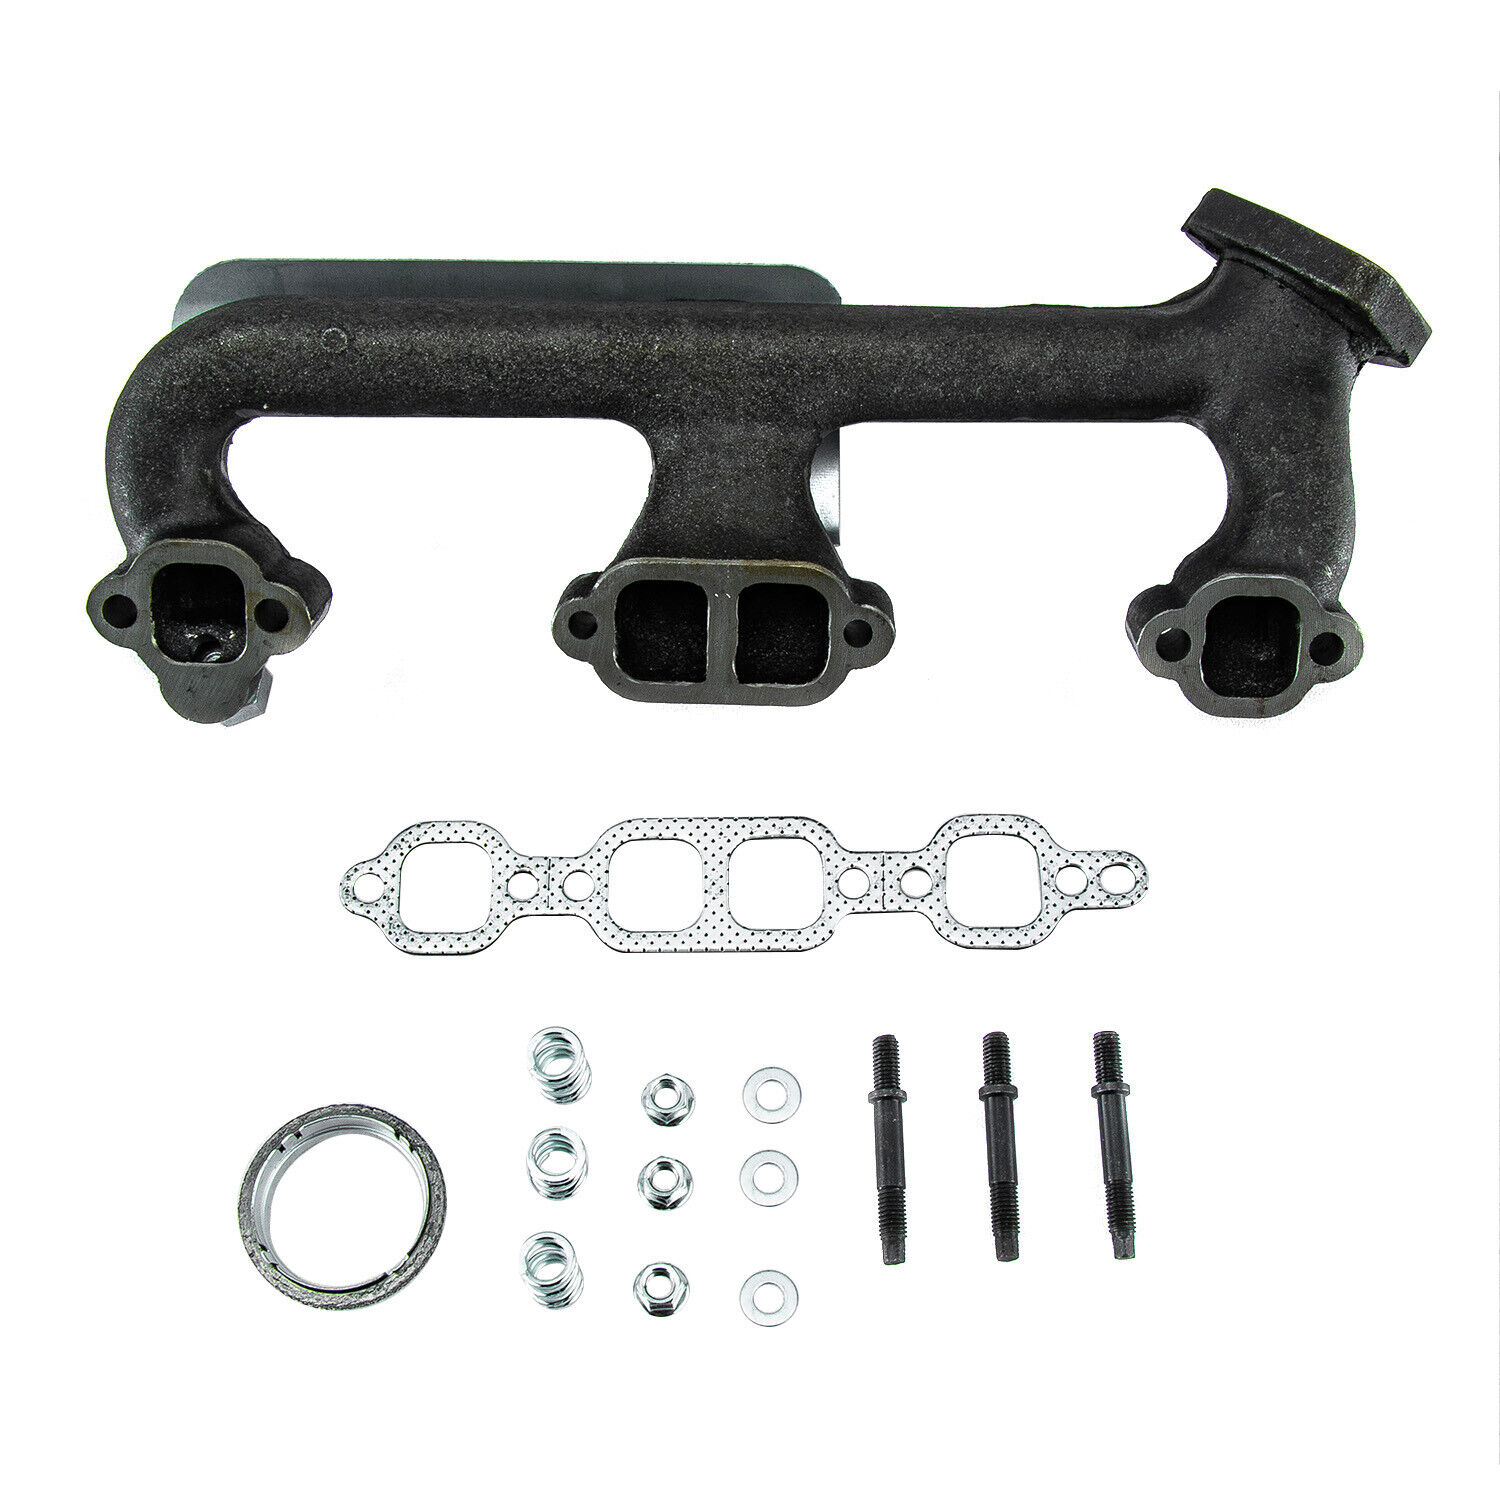 Exhaust Manifold For 1988-1995 1991 Chevy GMC C/K 1500 2500 350 305 5.0L 5.7L